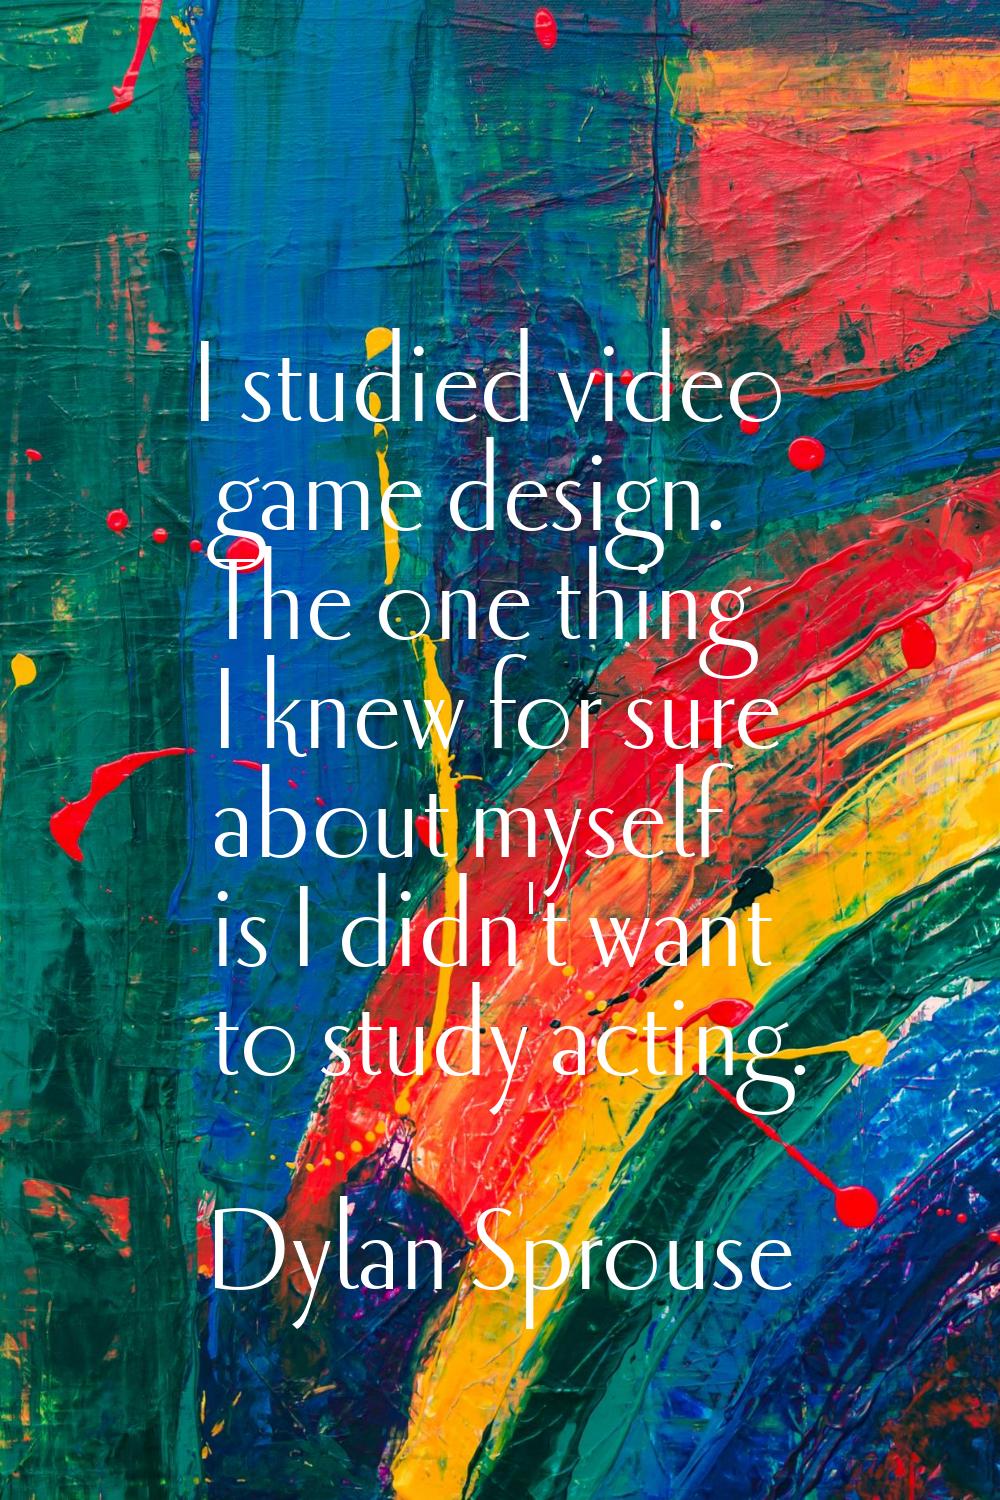 I studied video game design. The one thing I knew for sure about myself is I didn't want to study a